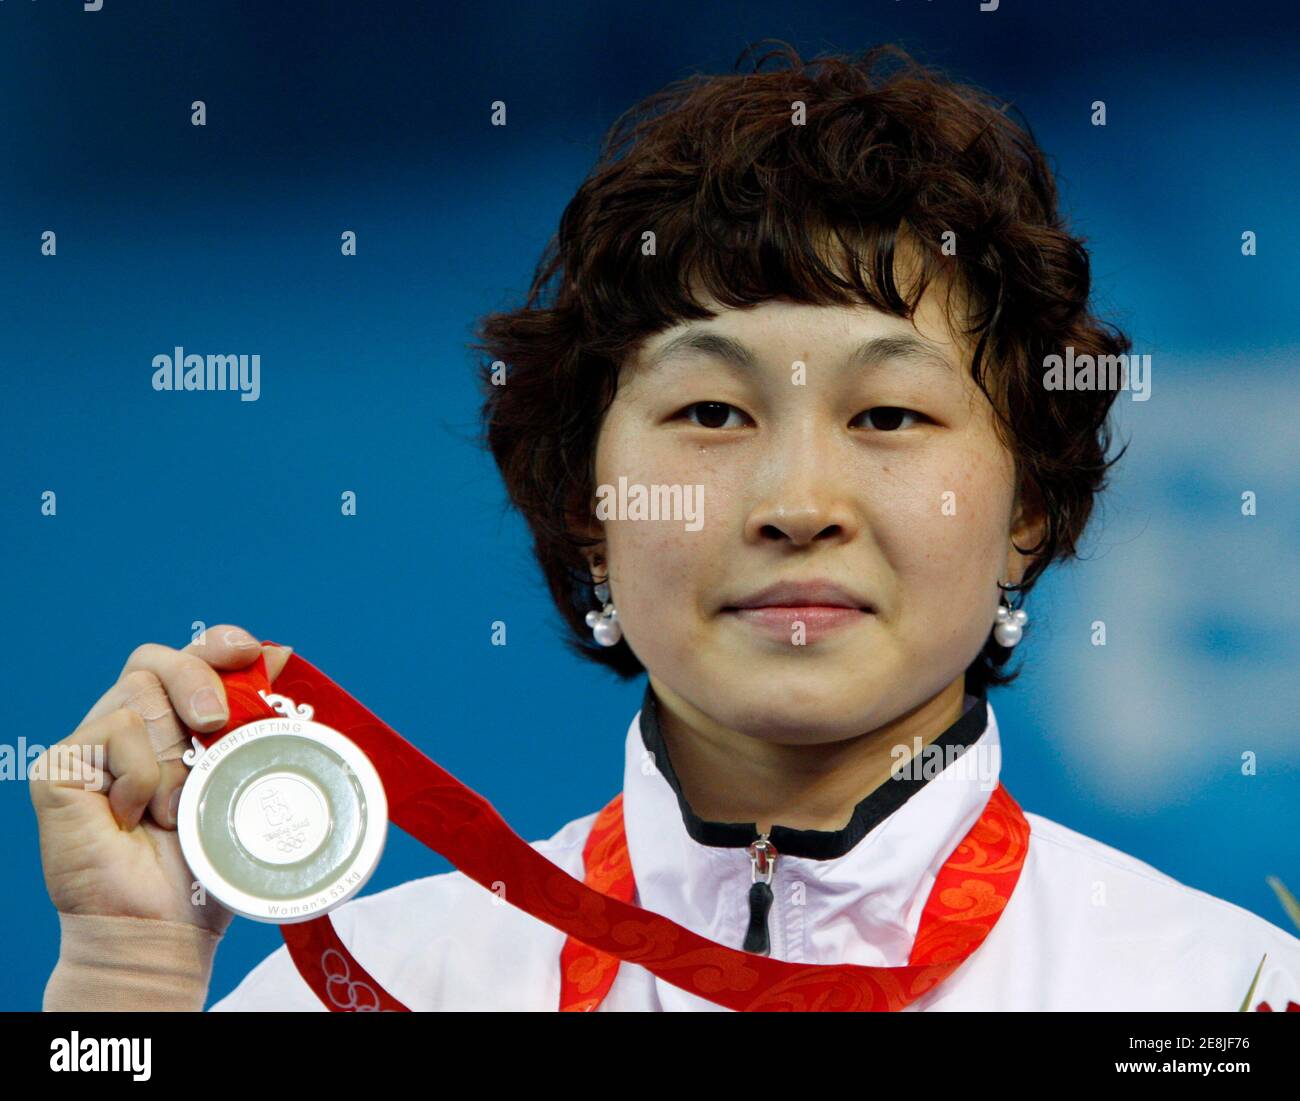 Yoon Jinhee of South Korea poses with her silver medal in the women's 53kg weightlifting competition at the Beijing 2008 Olympic Games August 10, 2008.     REUTERS/Oleg Popov (CHINA) Stock Photo